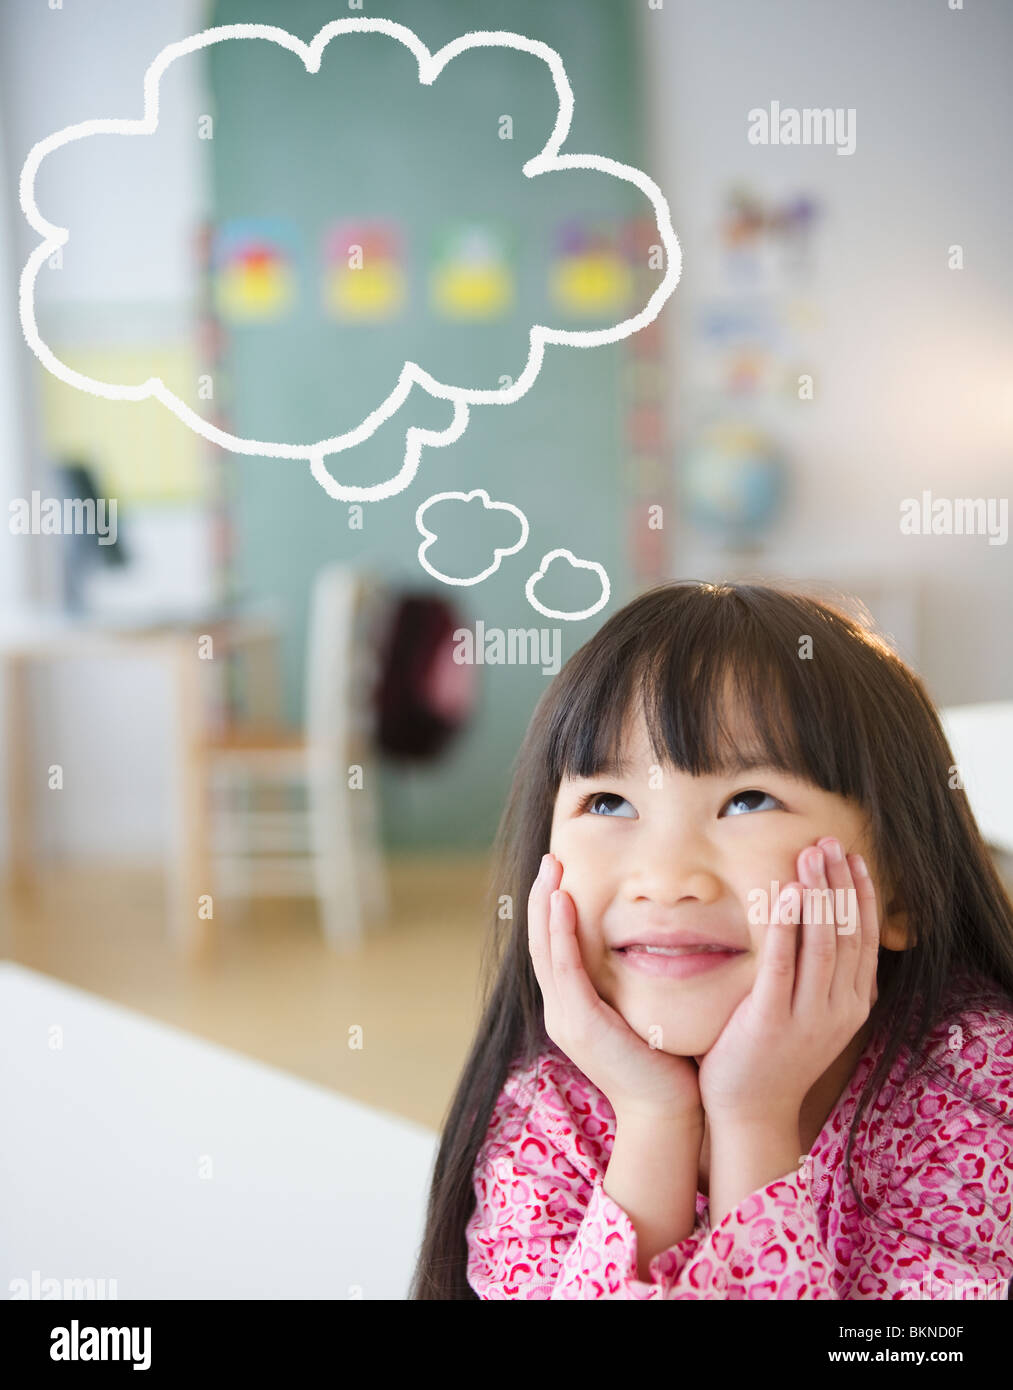 Chinese girl with thought bubble in classroom Stock Photo